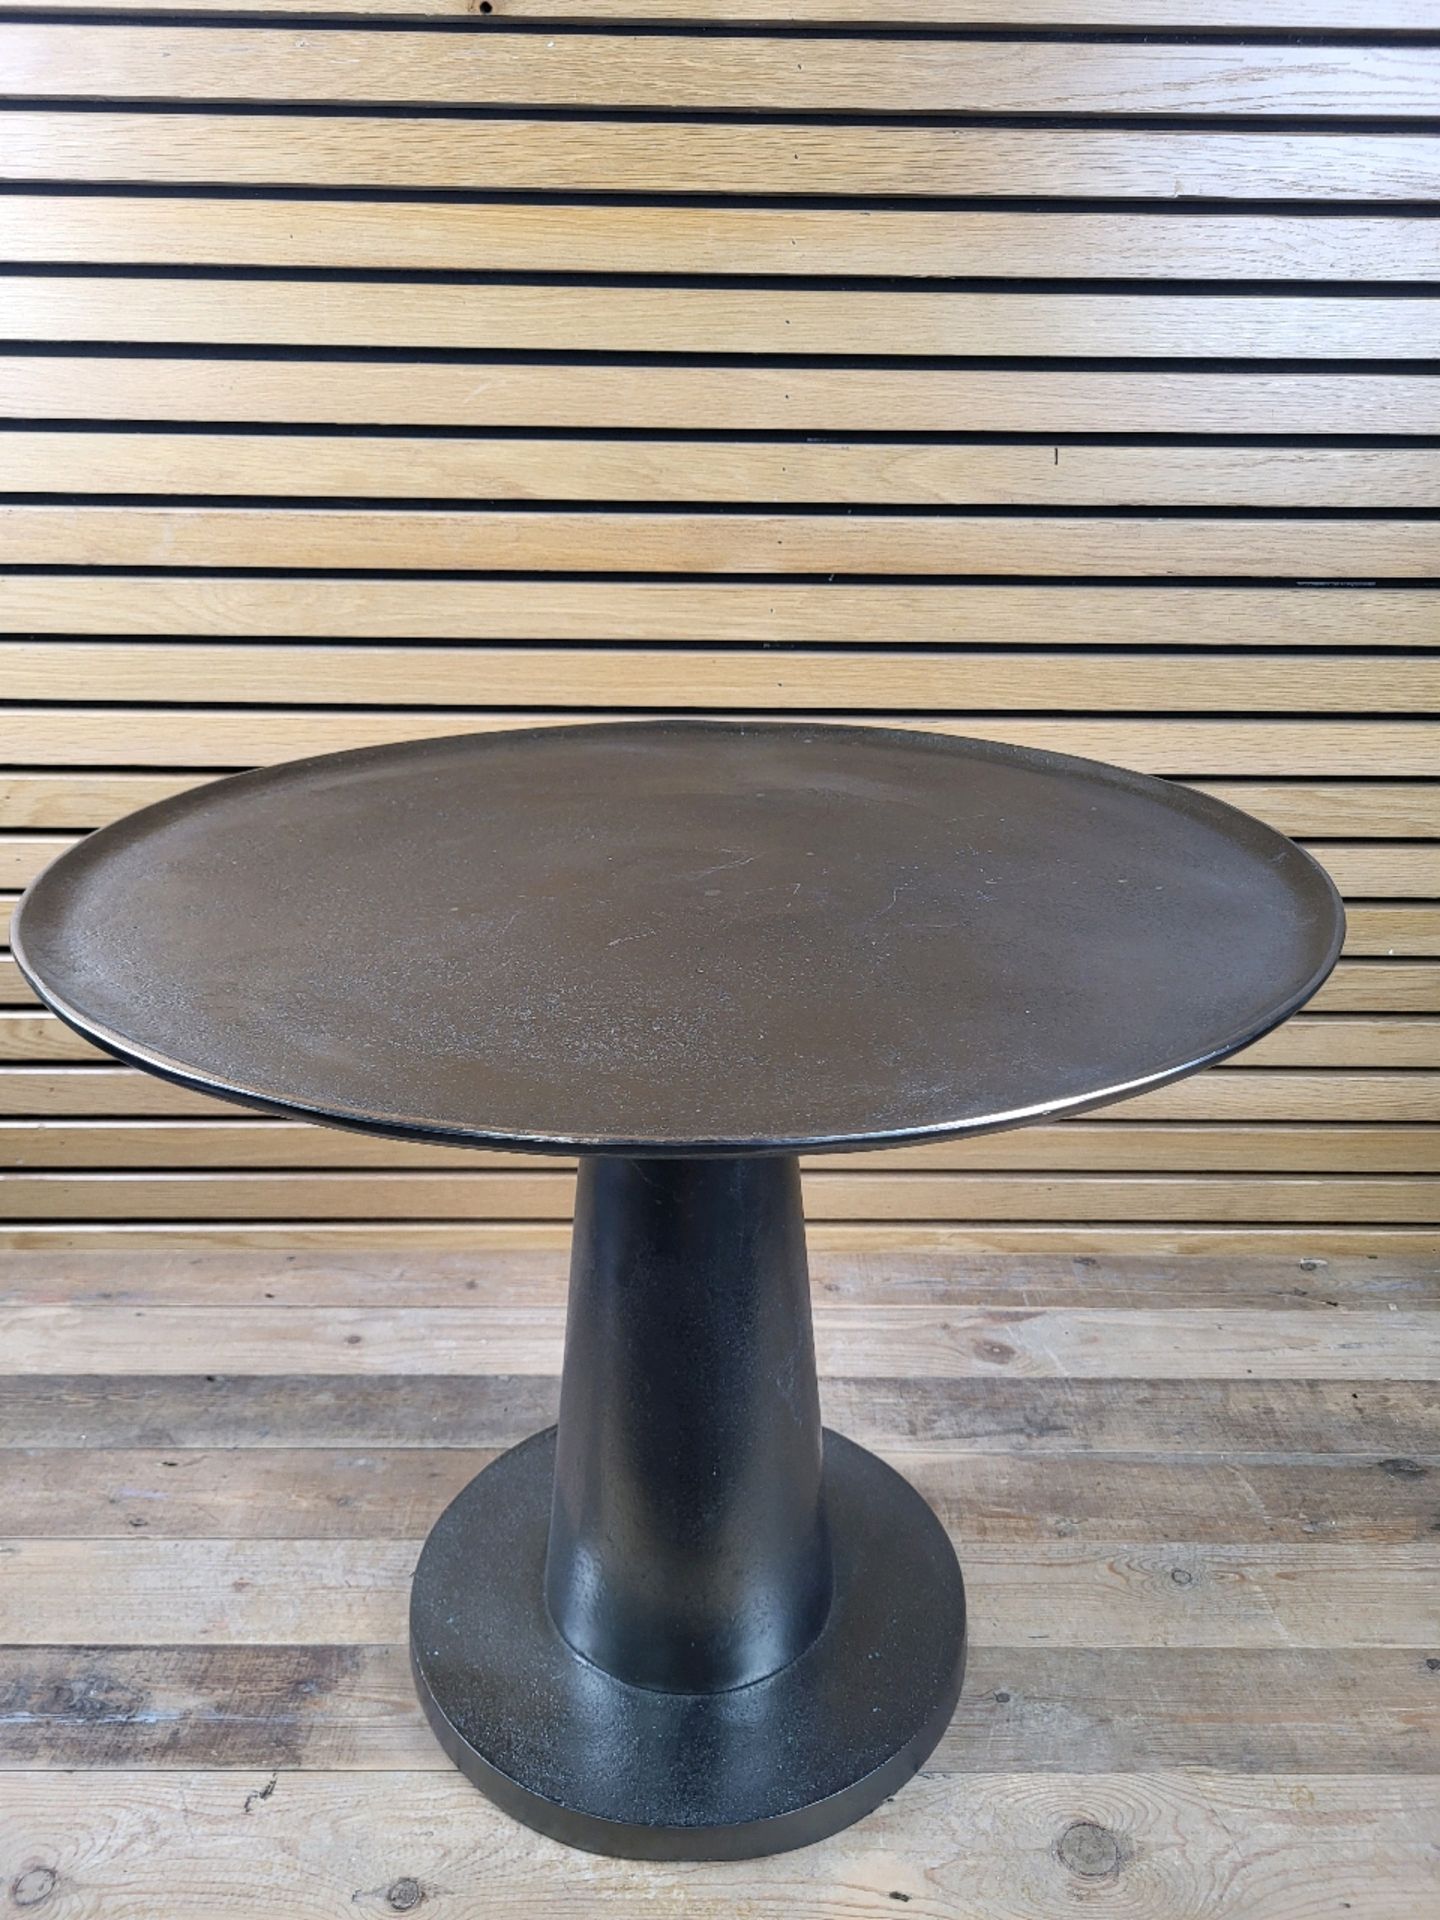 A by Amara Cone Base Metal Side Table - Image 2 of 3